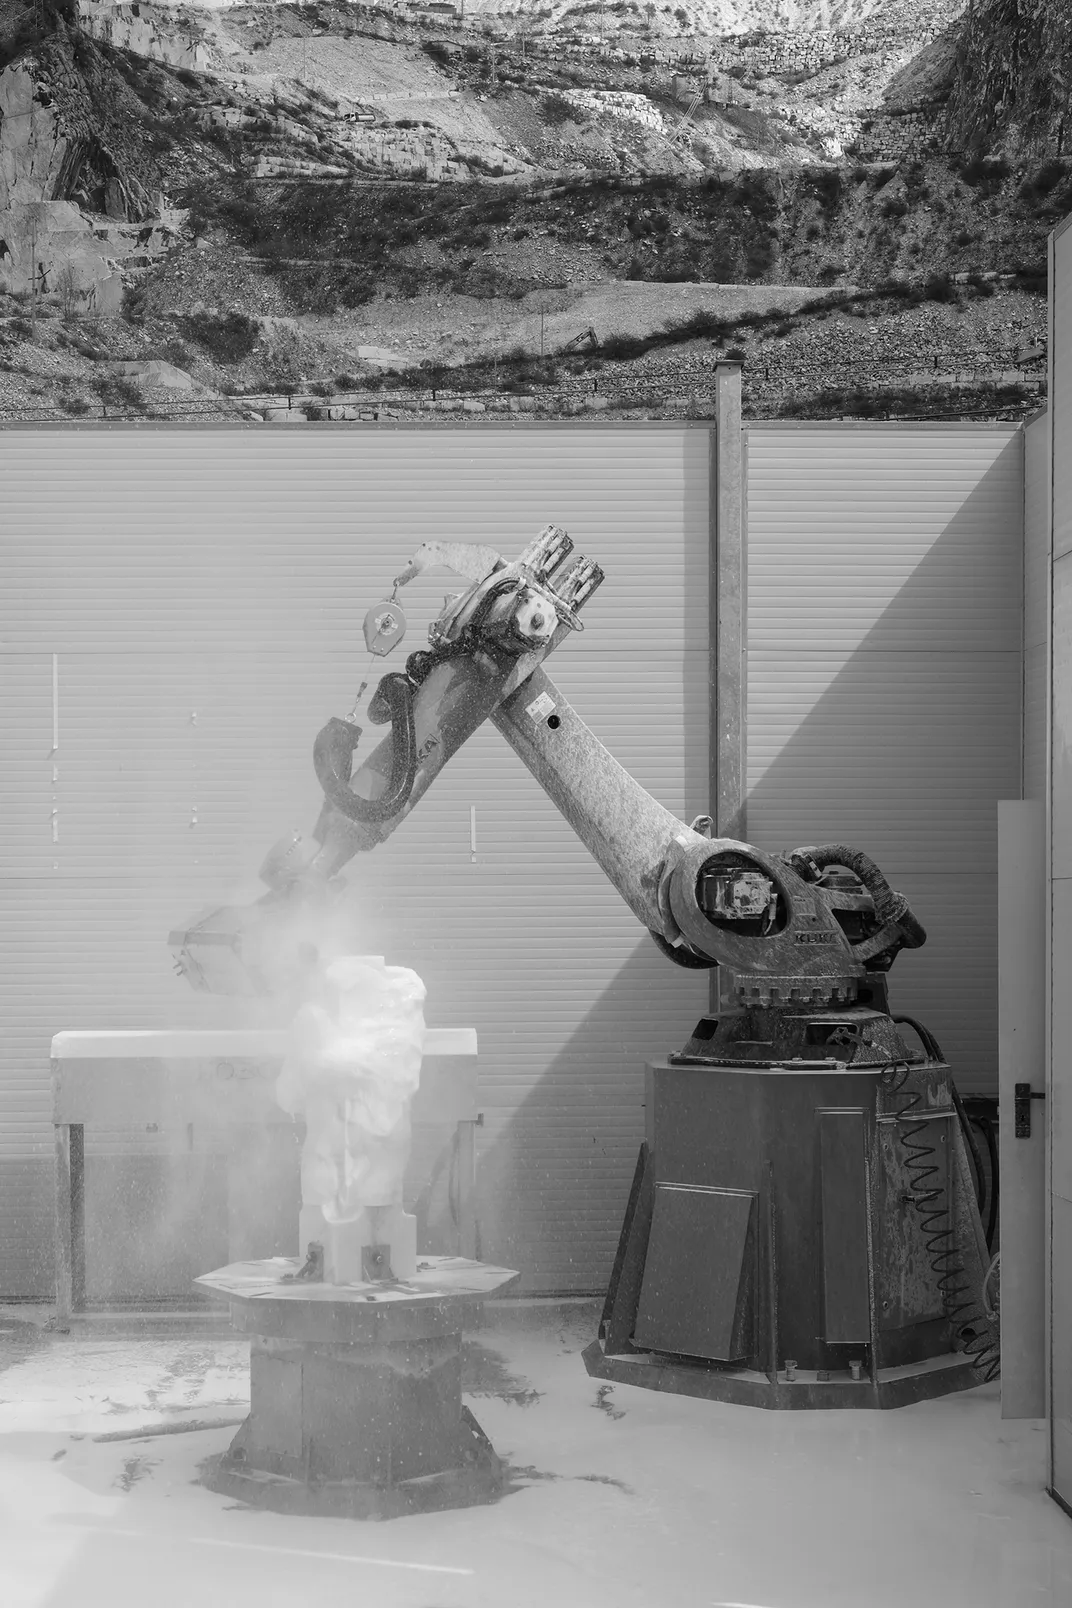 The robot proceeds from large-scale milling to detailed carving by selecting from increasingly fine-pointed instruments that attach to its “arm.”